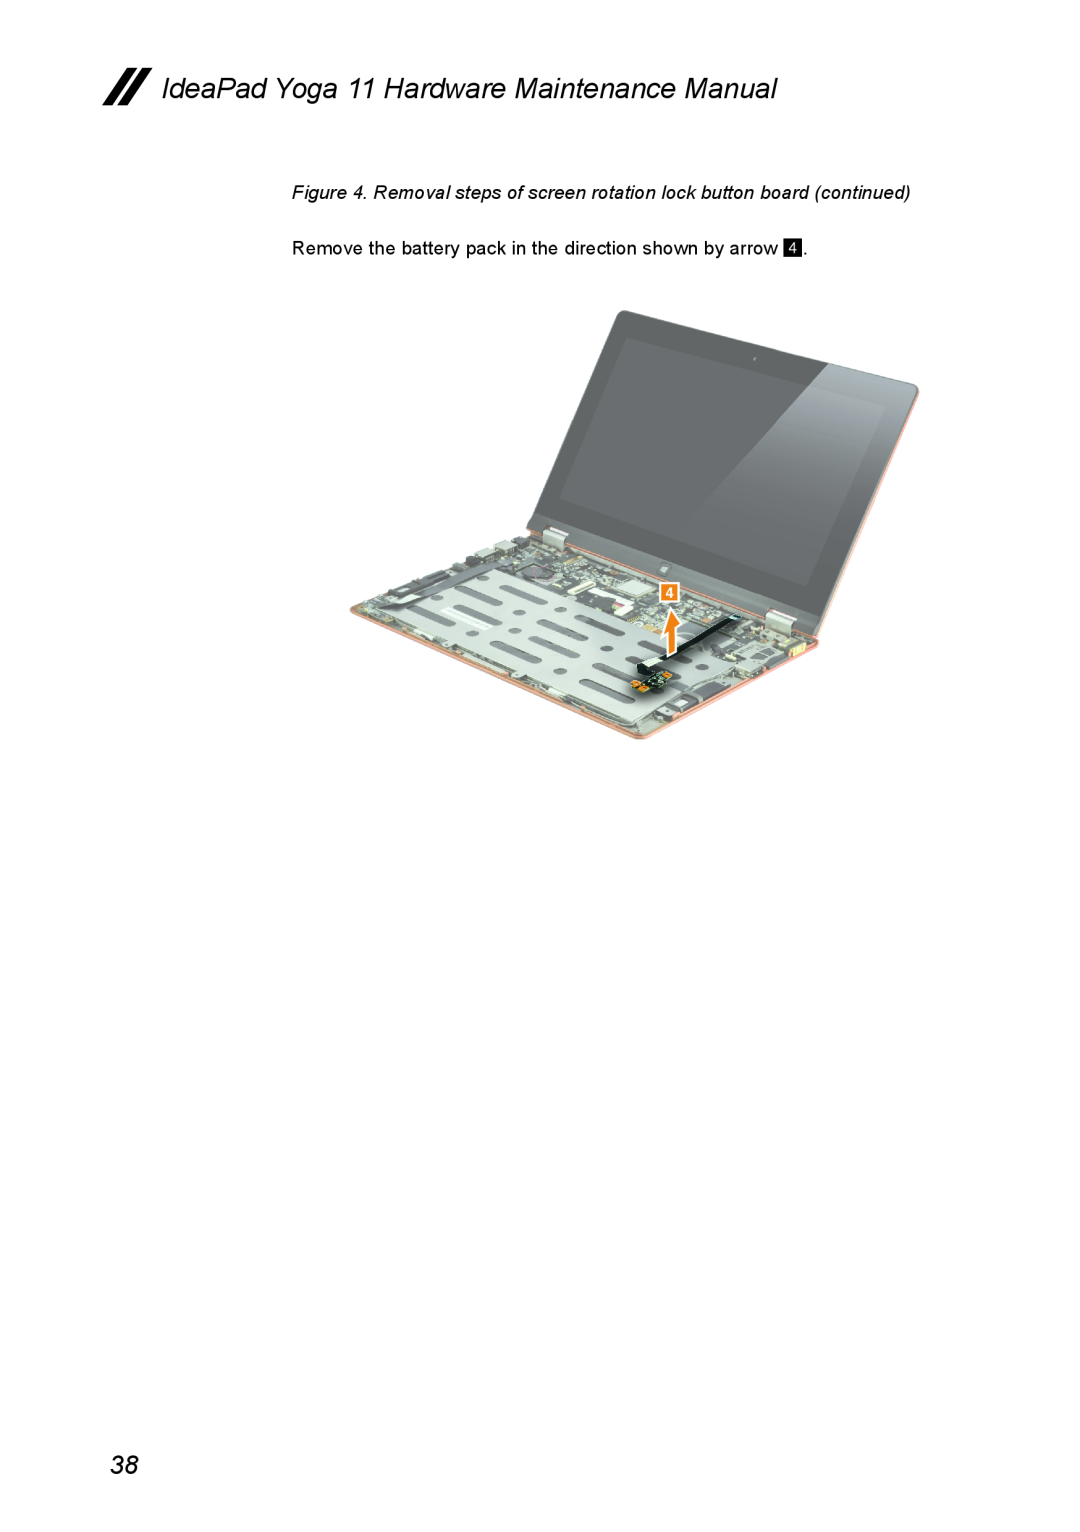 Lenovo manual IdeaPad Yoga 11 Hardware Maintenance Manual, Remove the battery pack in the direction shown by arrow 